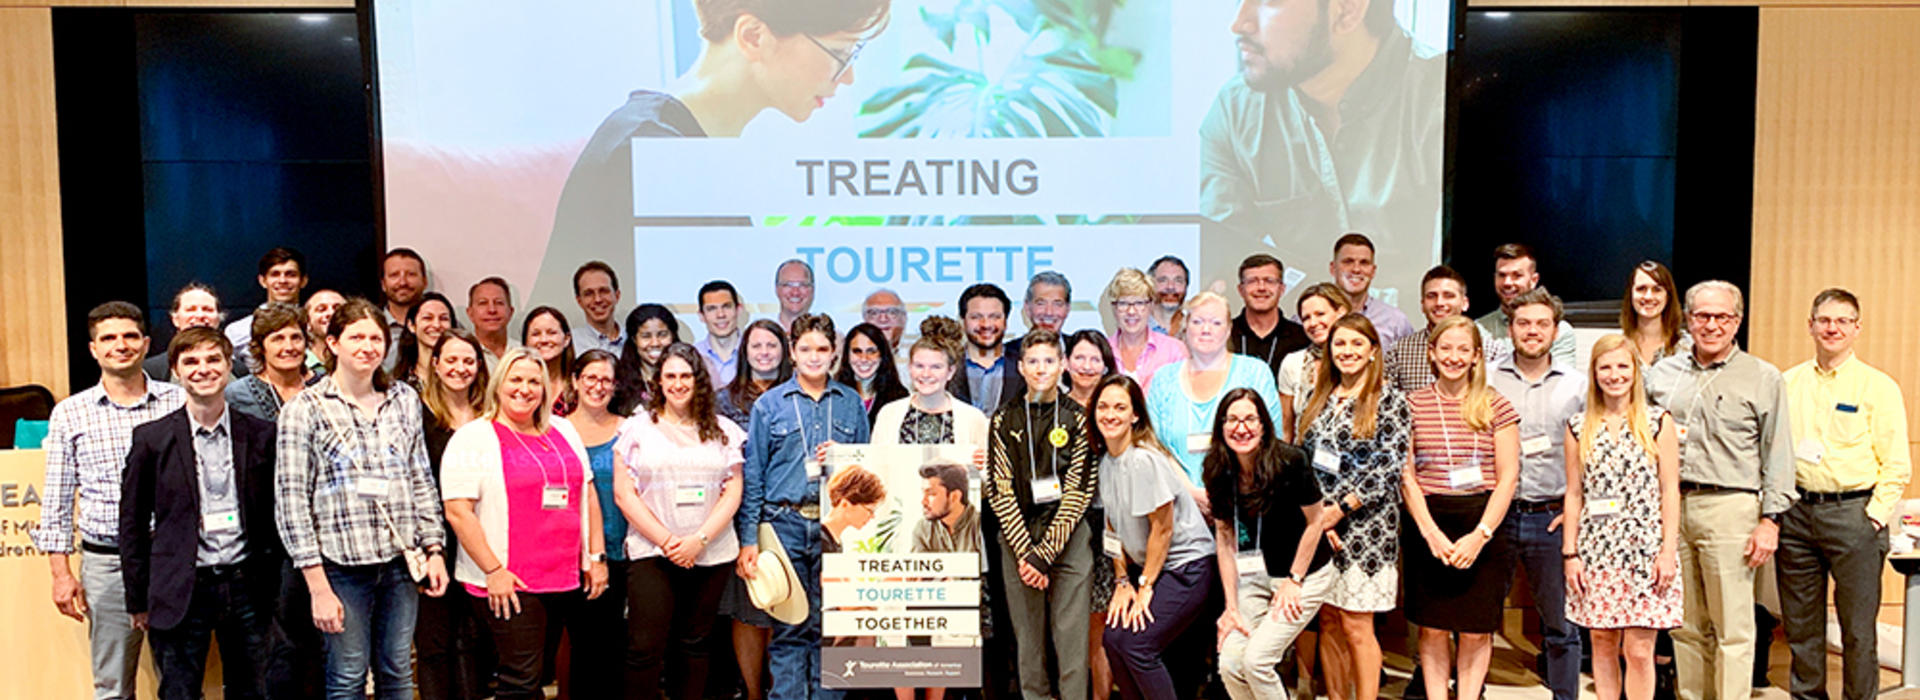 A group of people standing together in front of a sign saying Treating Tourette Together